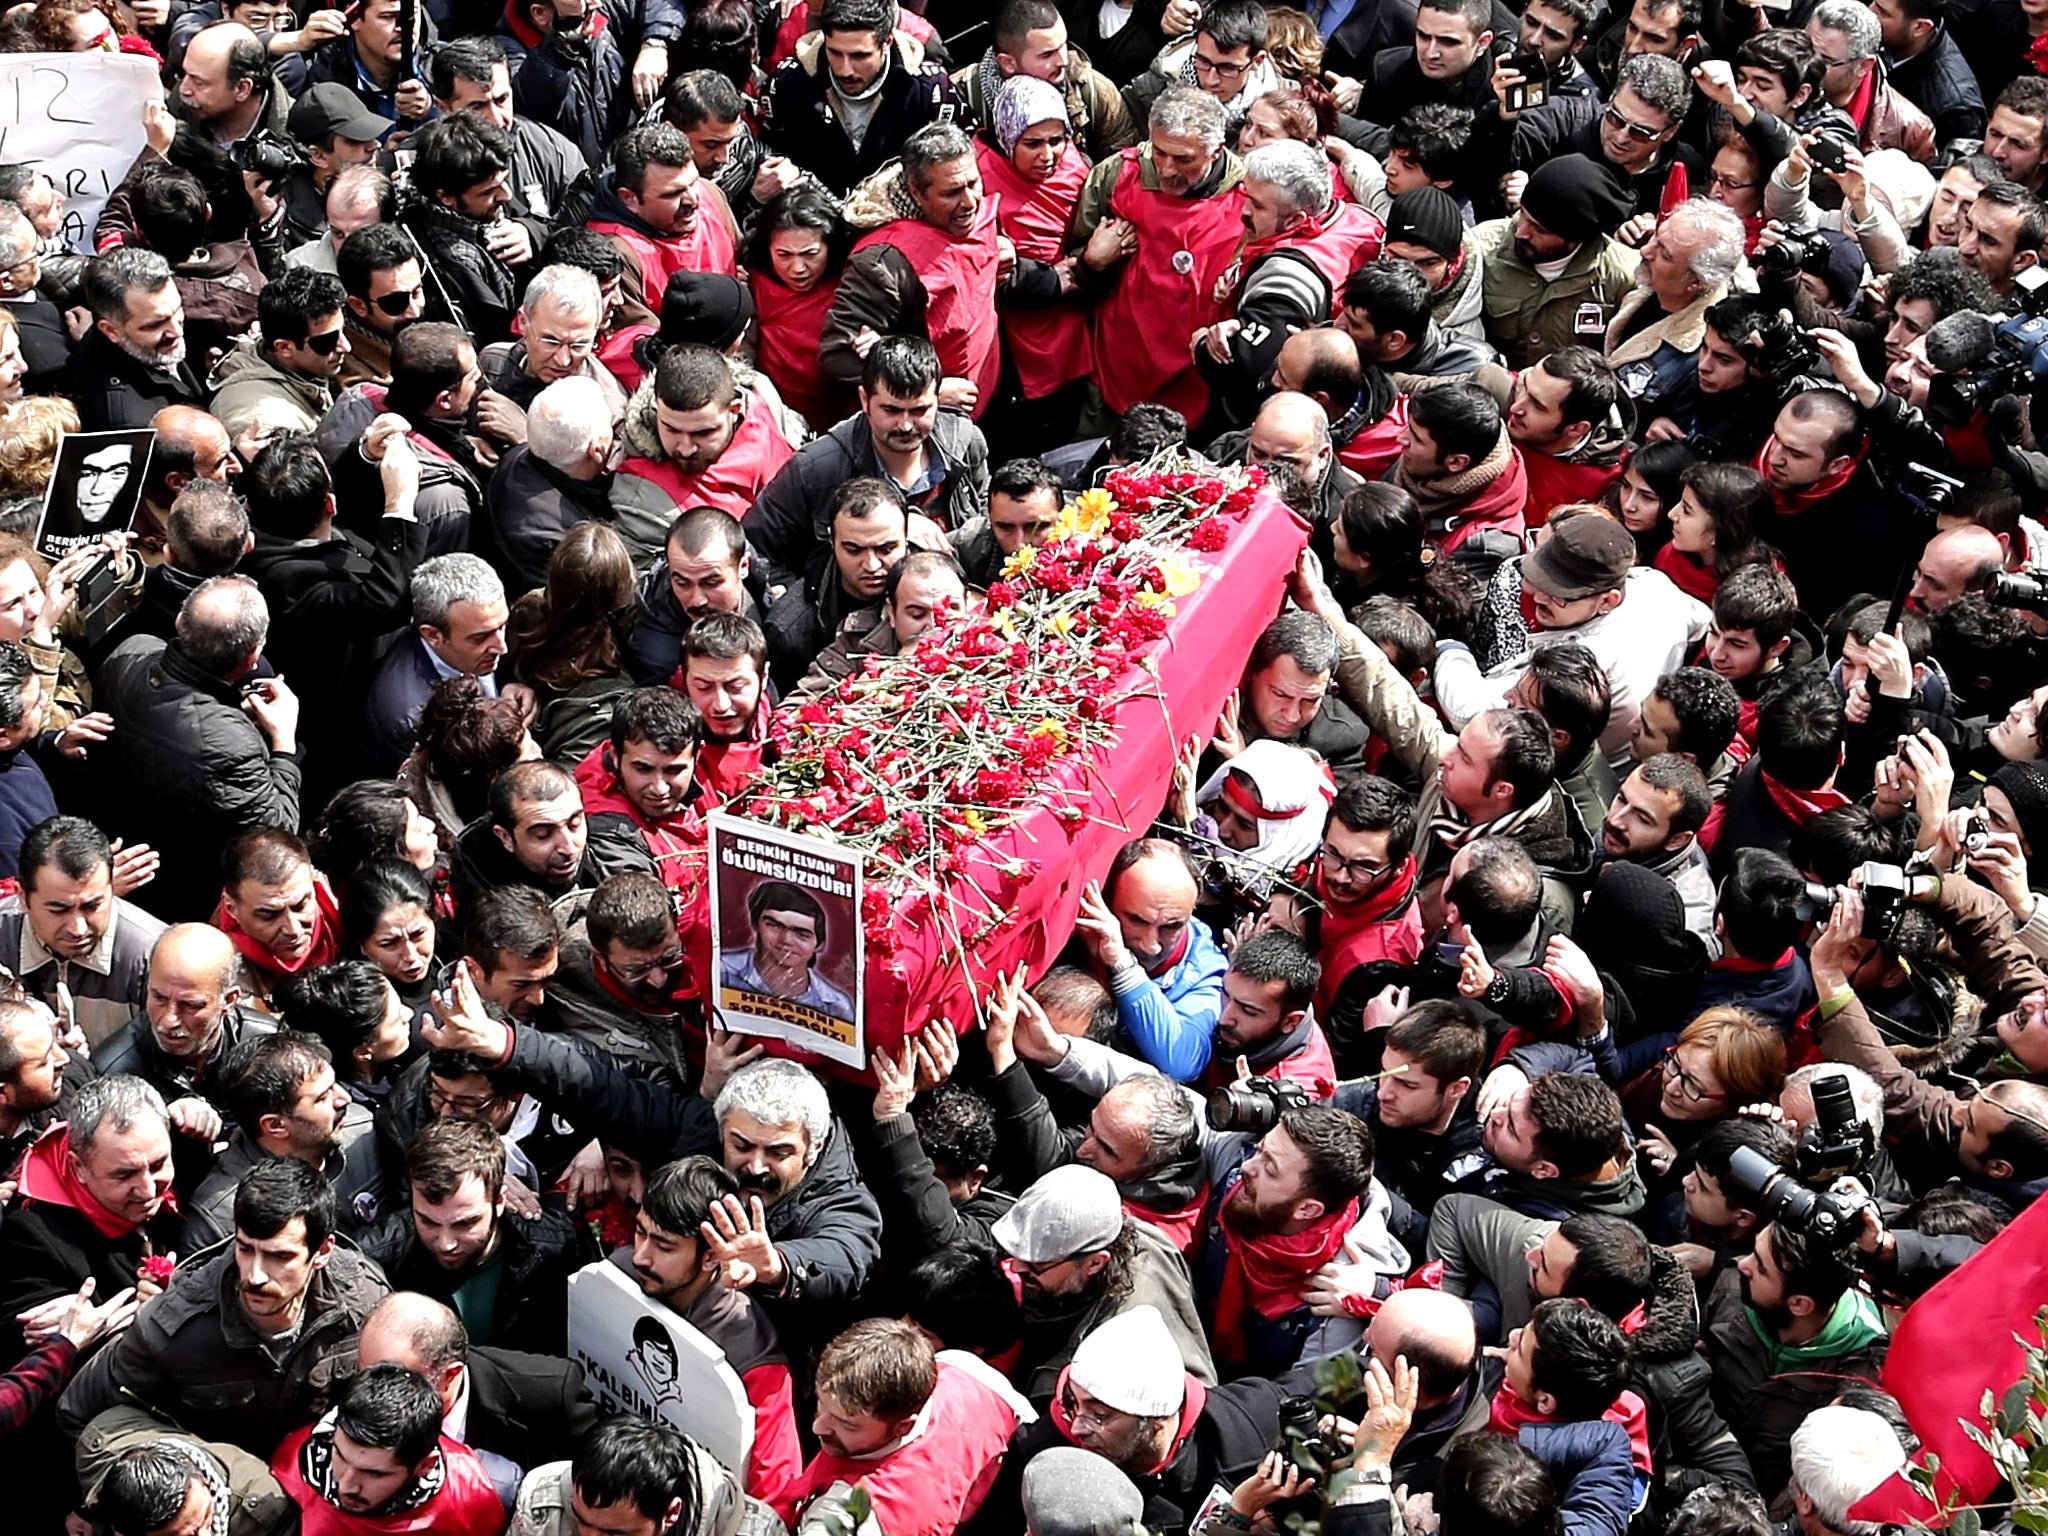 The coffin of Berkin Elvan is carried by mourners in Istanbul